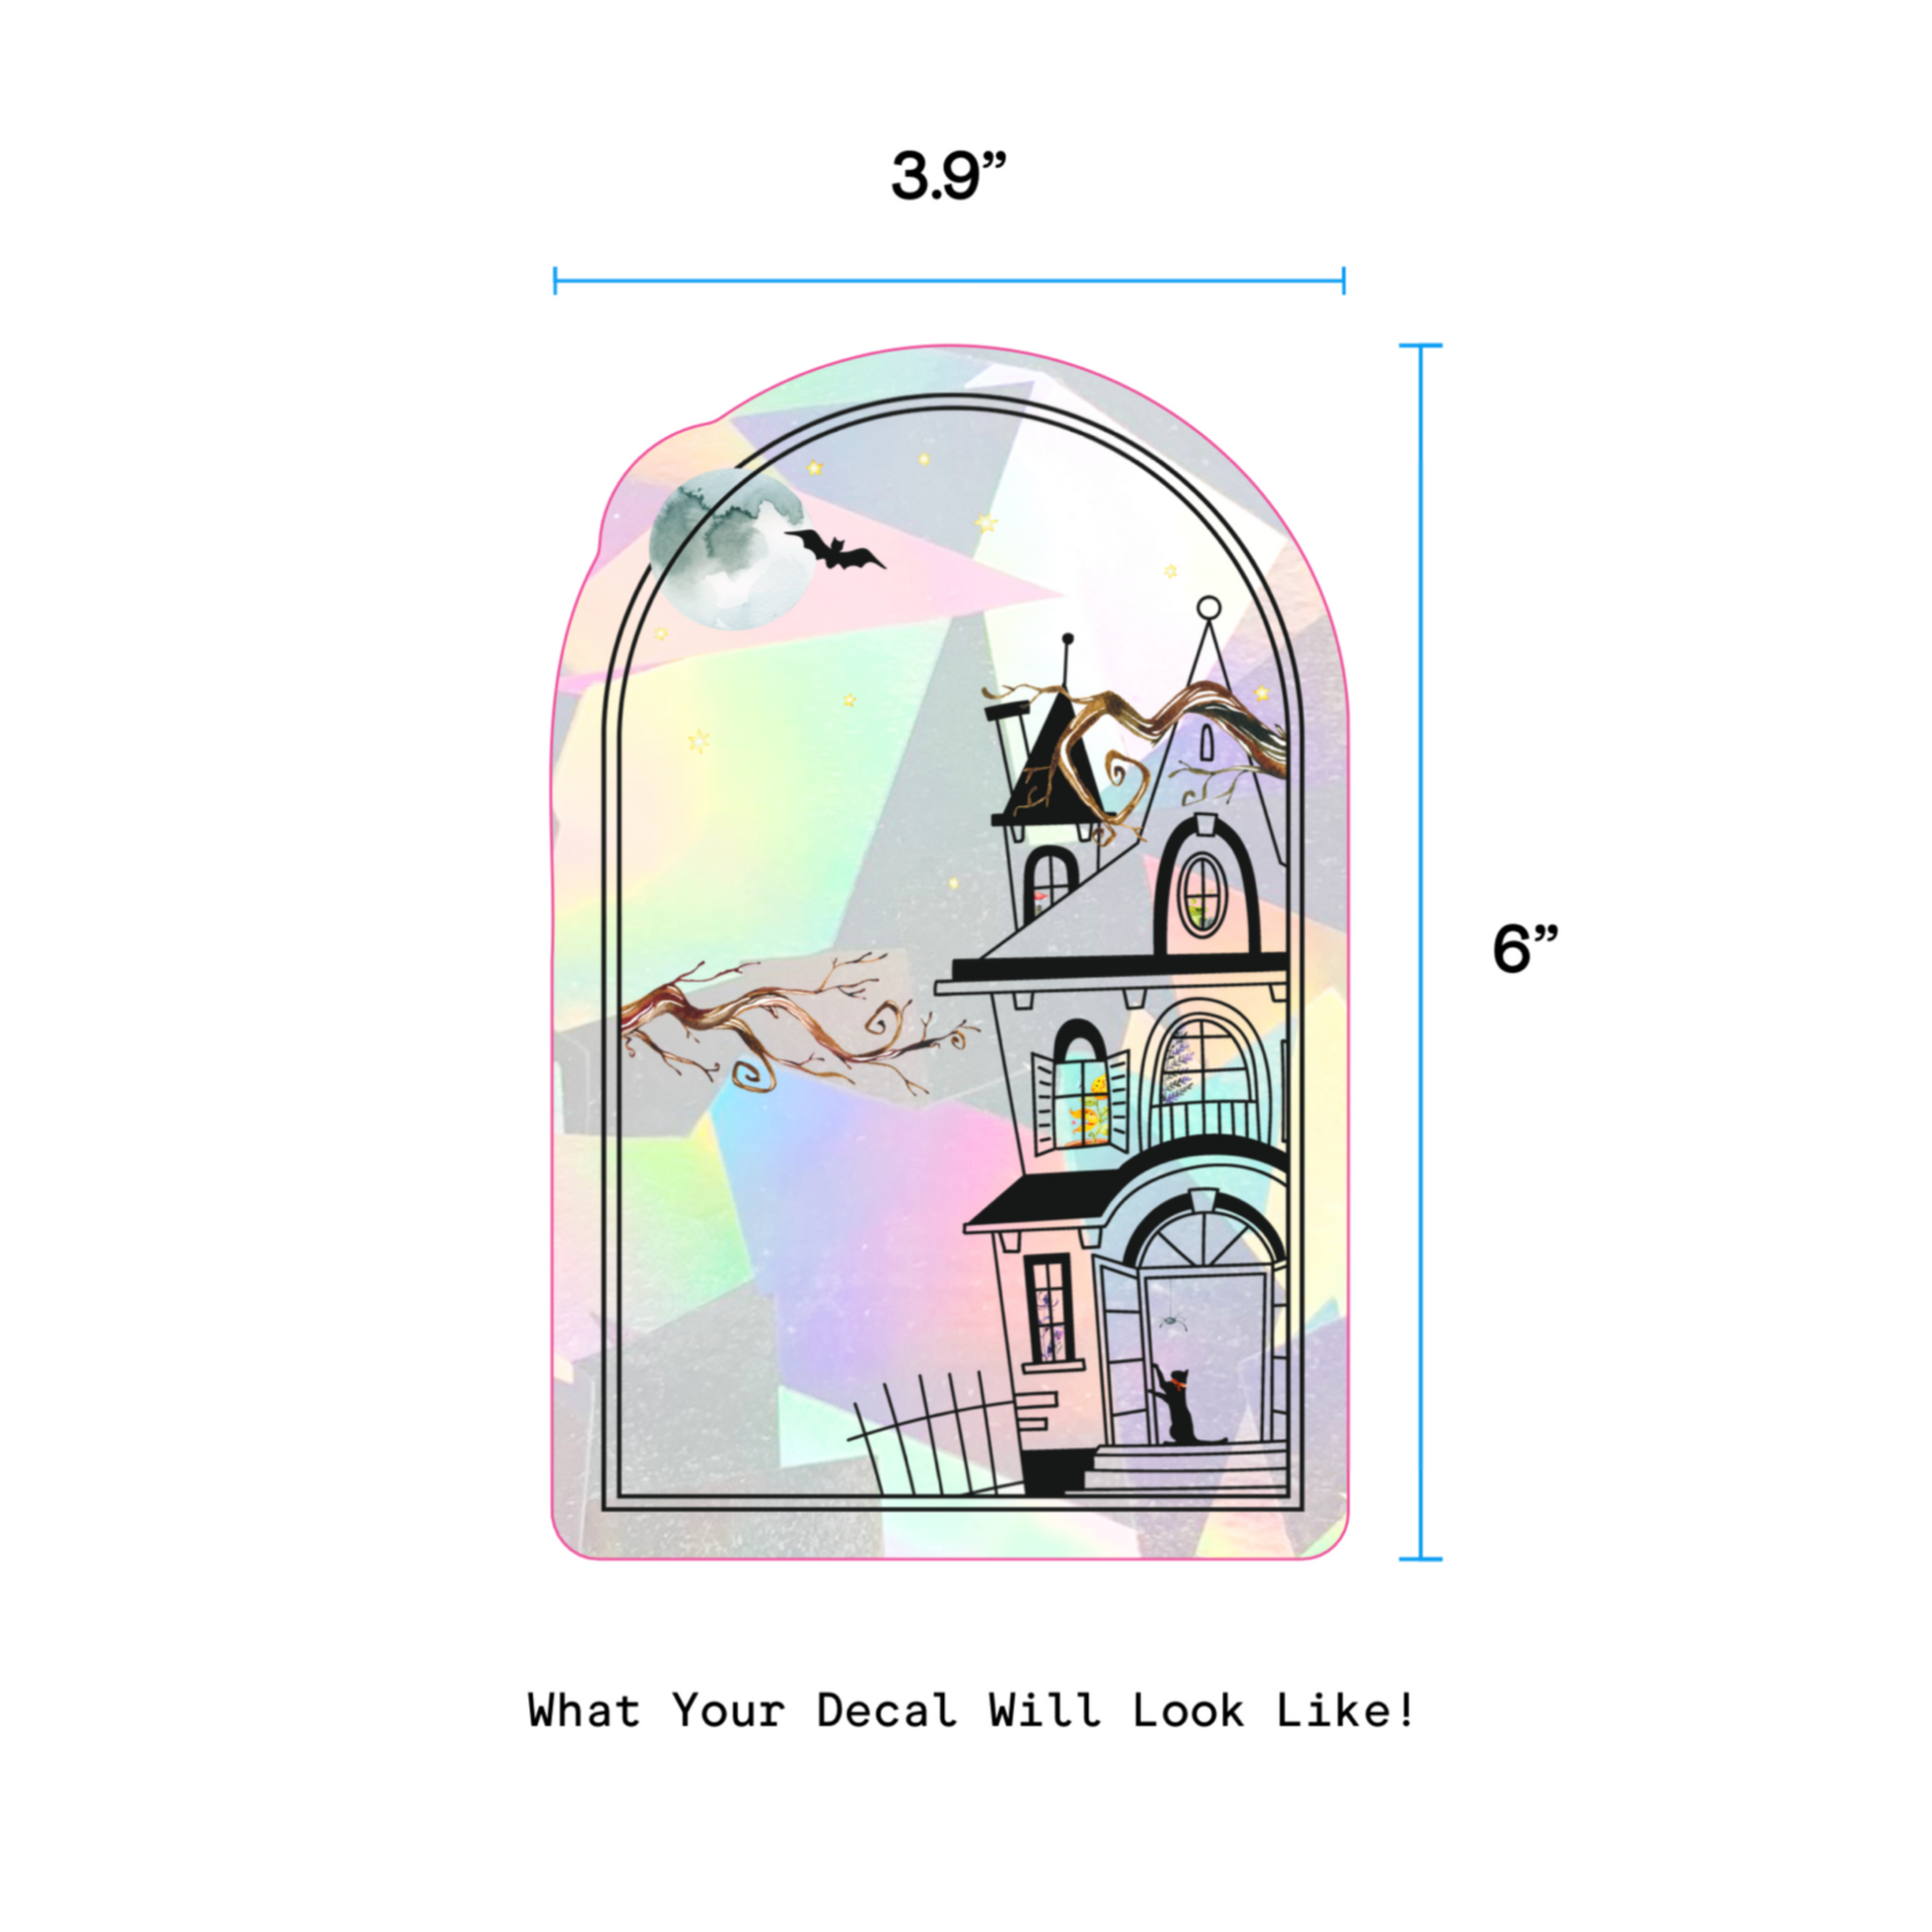 Magical Manor Suncatcher Sticker My Sparkling Emporium: an arch with a full moon and haunted mansion. Take a closer look at the windows to see some witchy scenes!